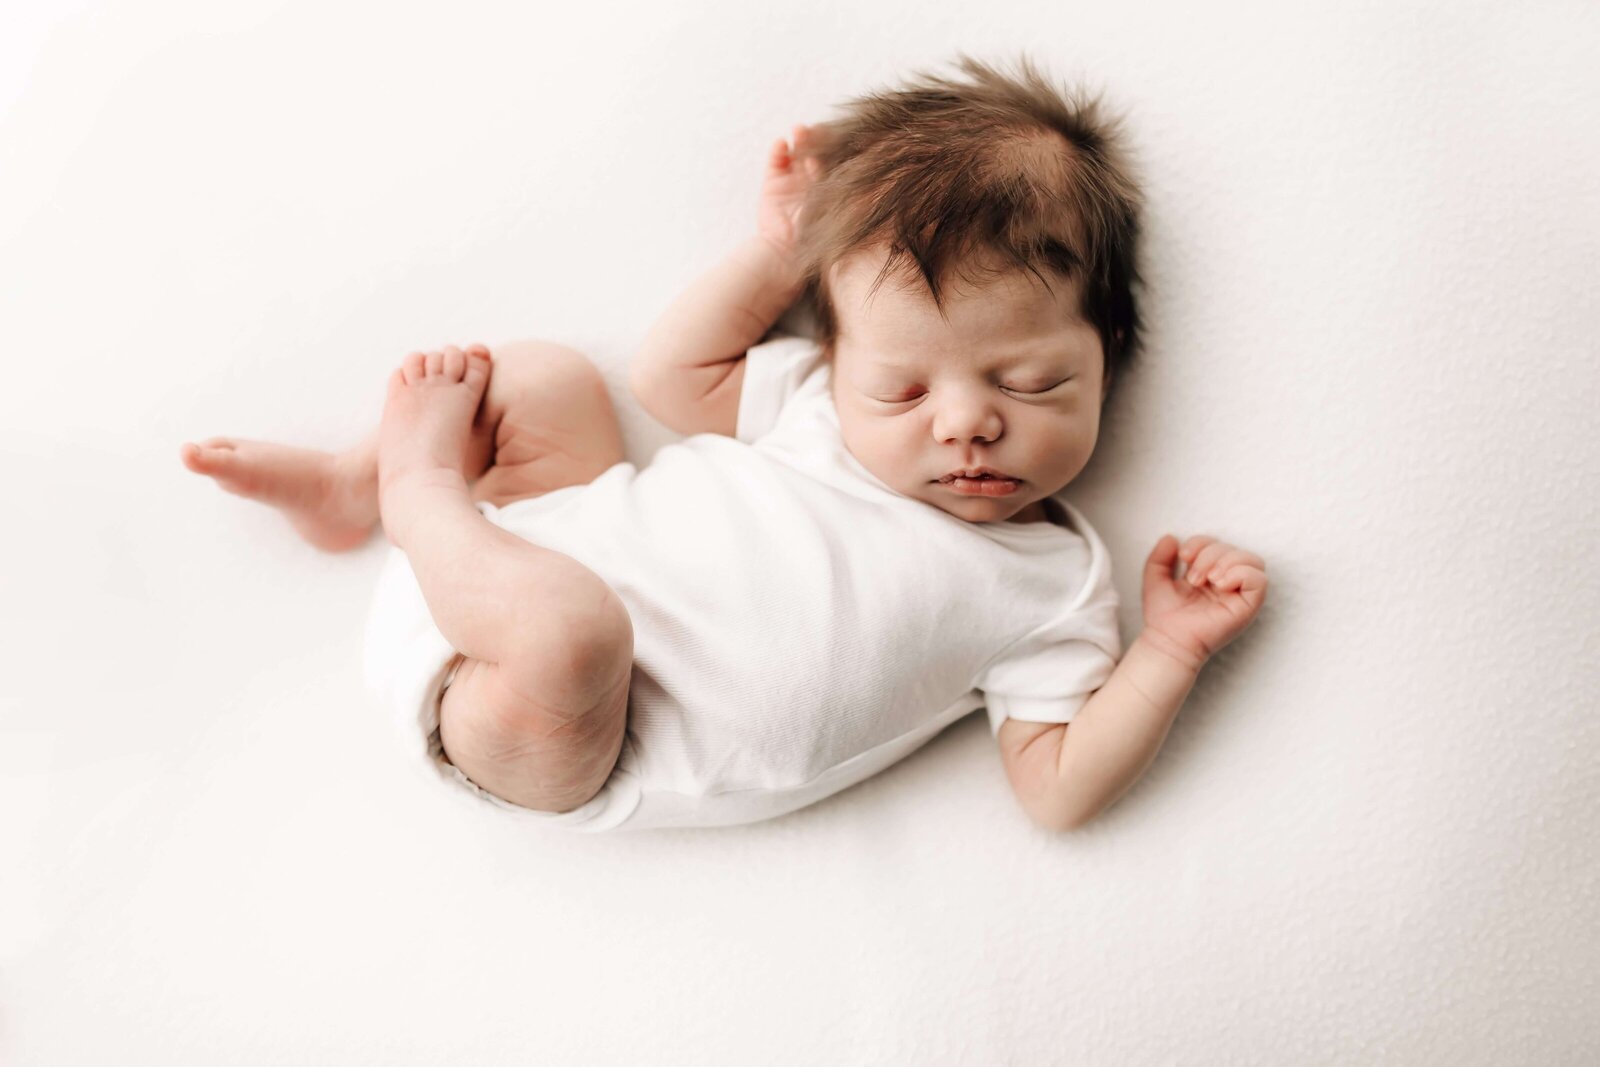 St_Louis_Newborn_Photographer_Kelly_Laramore_Photography_113-Recovered